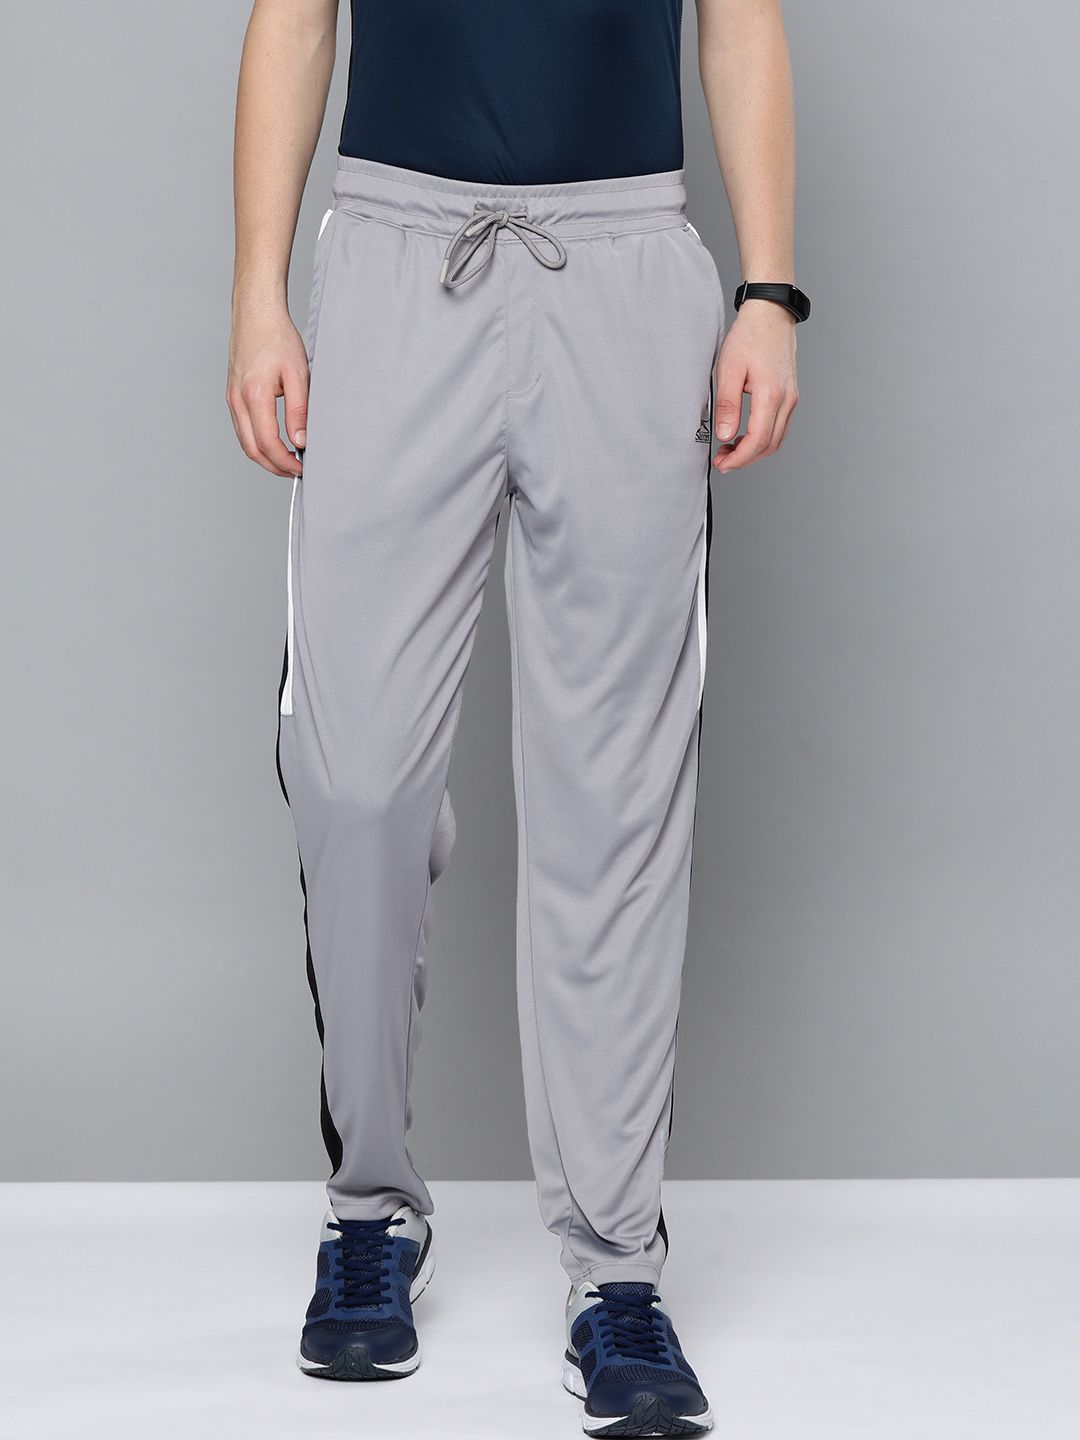 Slazenger Women Grey Solid Joggers Price in India, Full Specifications &  Offers | DTashion.com